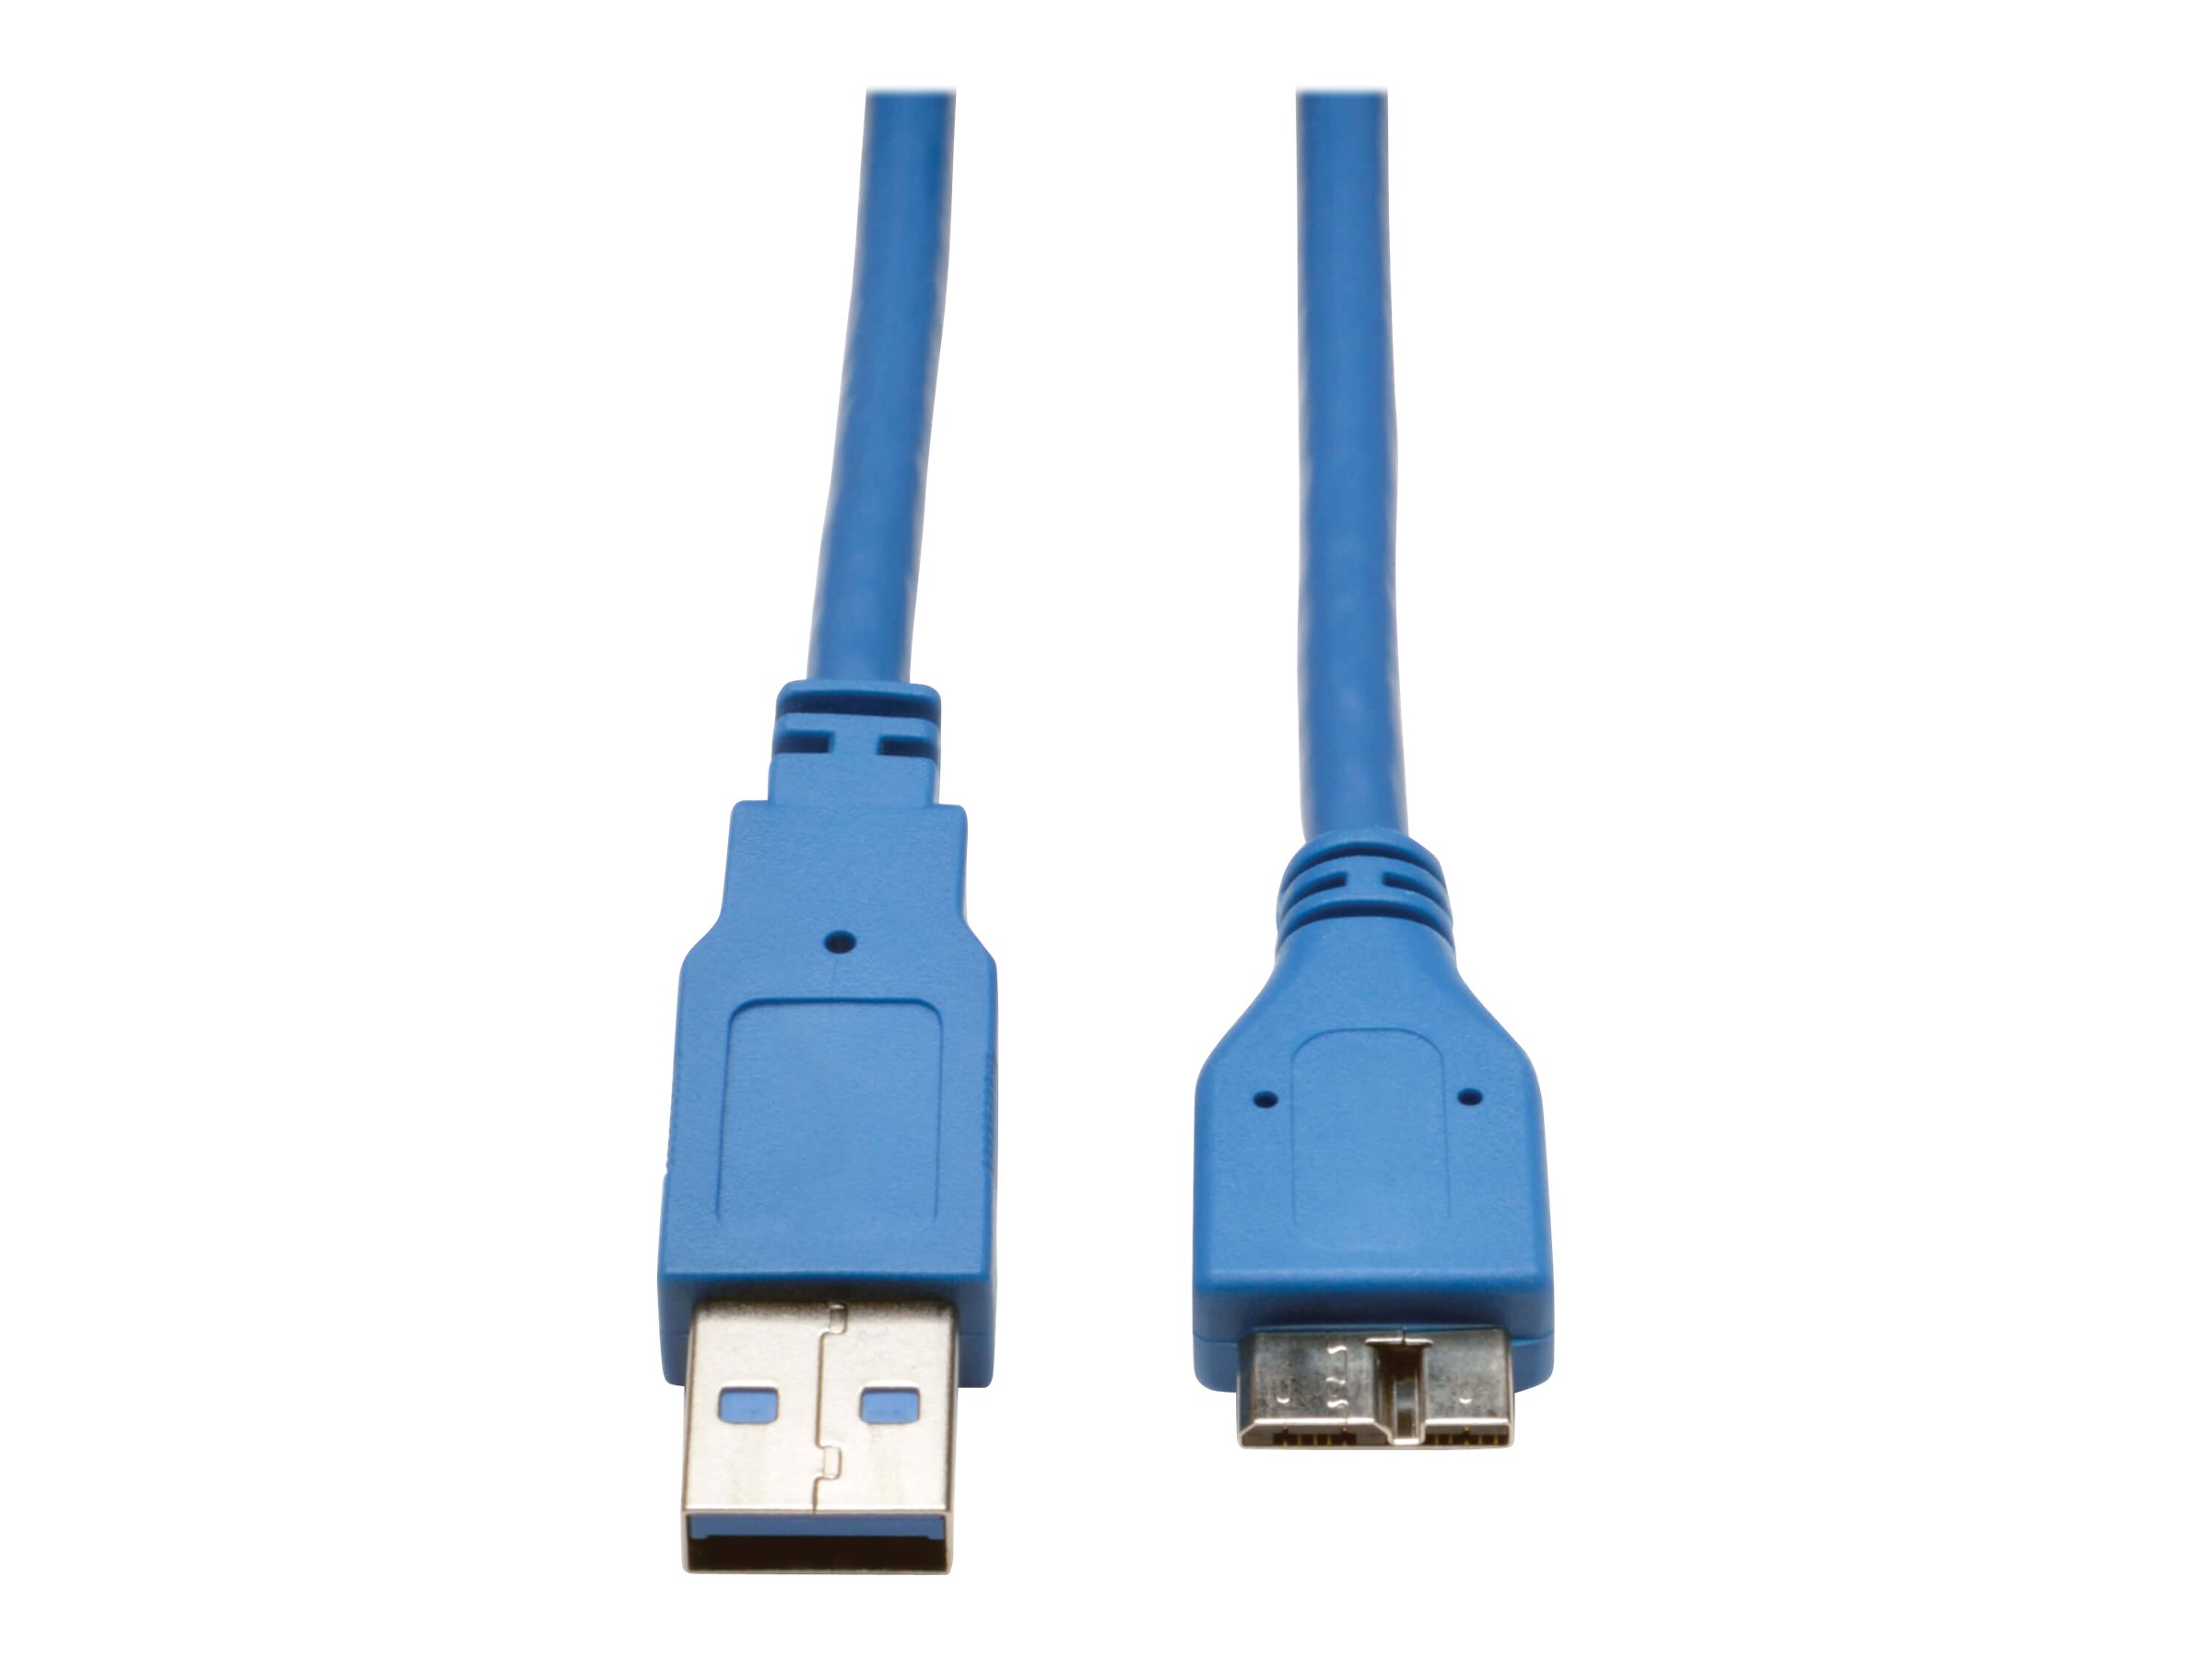 Eaton Tripp Lite Series USB 3.0 SuperSpeed Device Cable (A to Micro-B M/M), Blue, 6 ft. (1.83 m) - USB-Kabel - USB Typ A (M) zu 